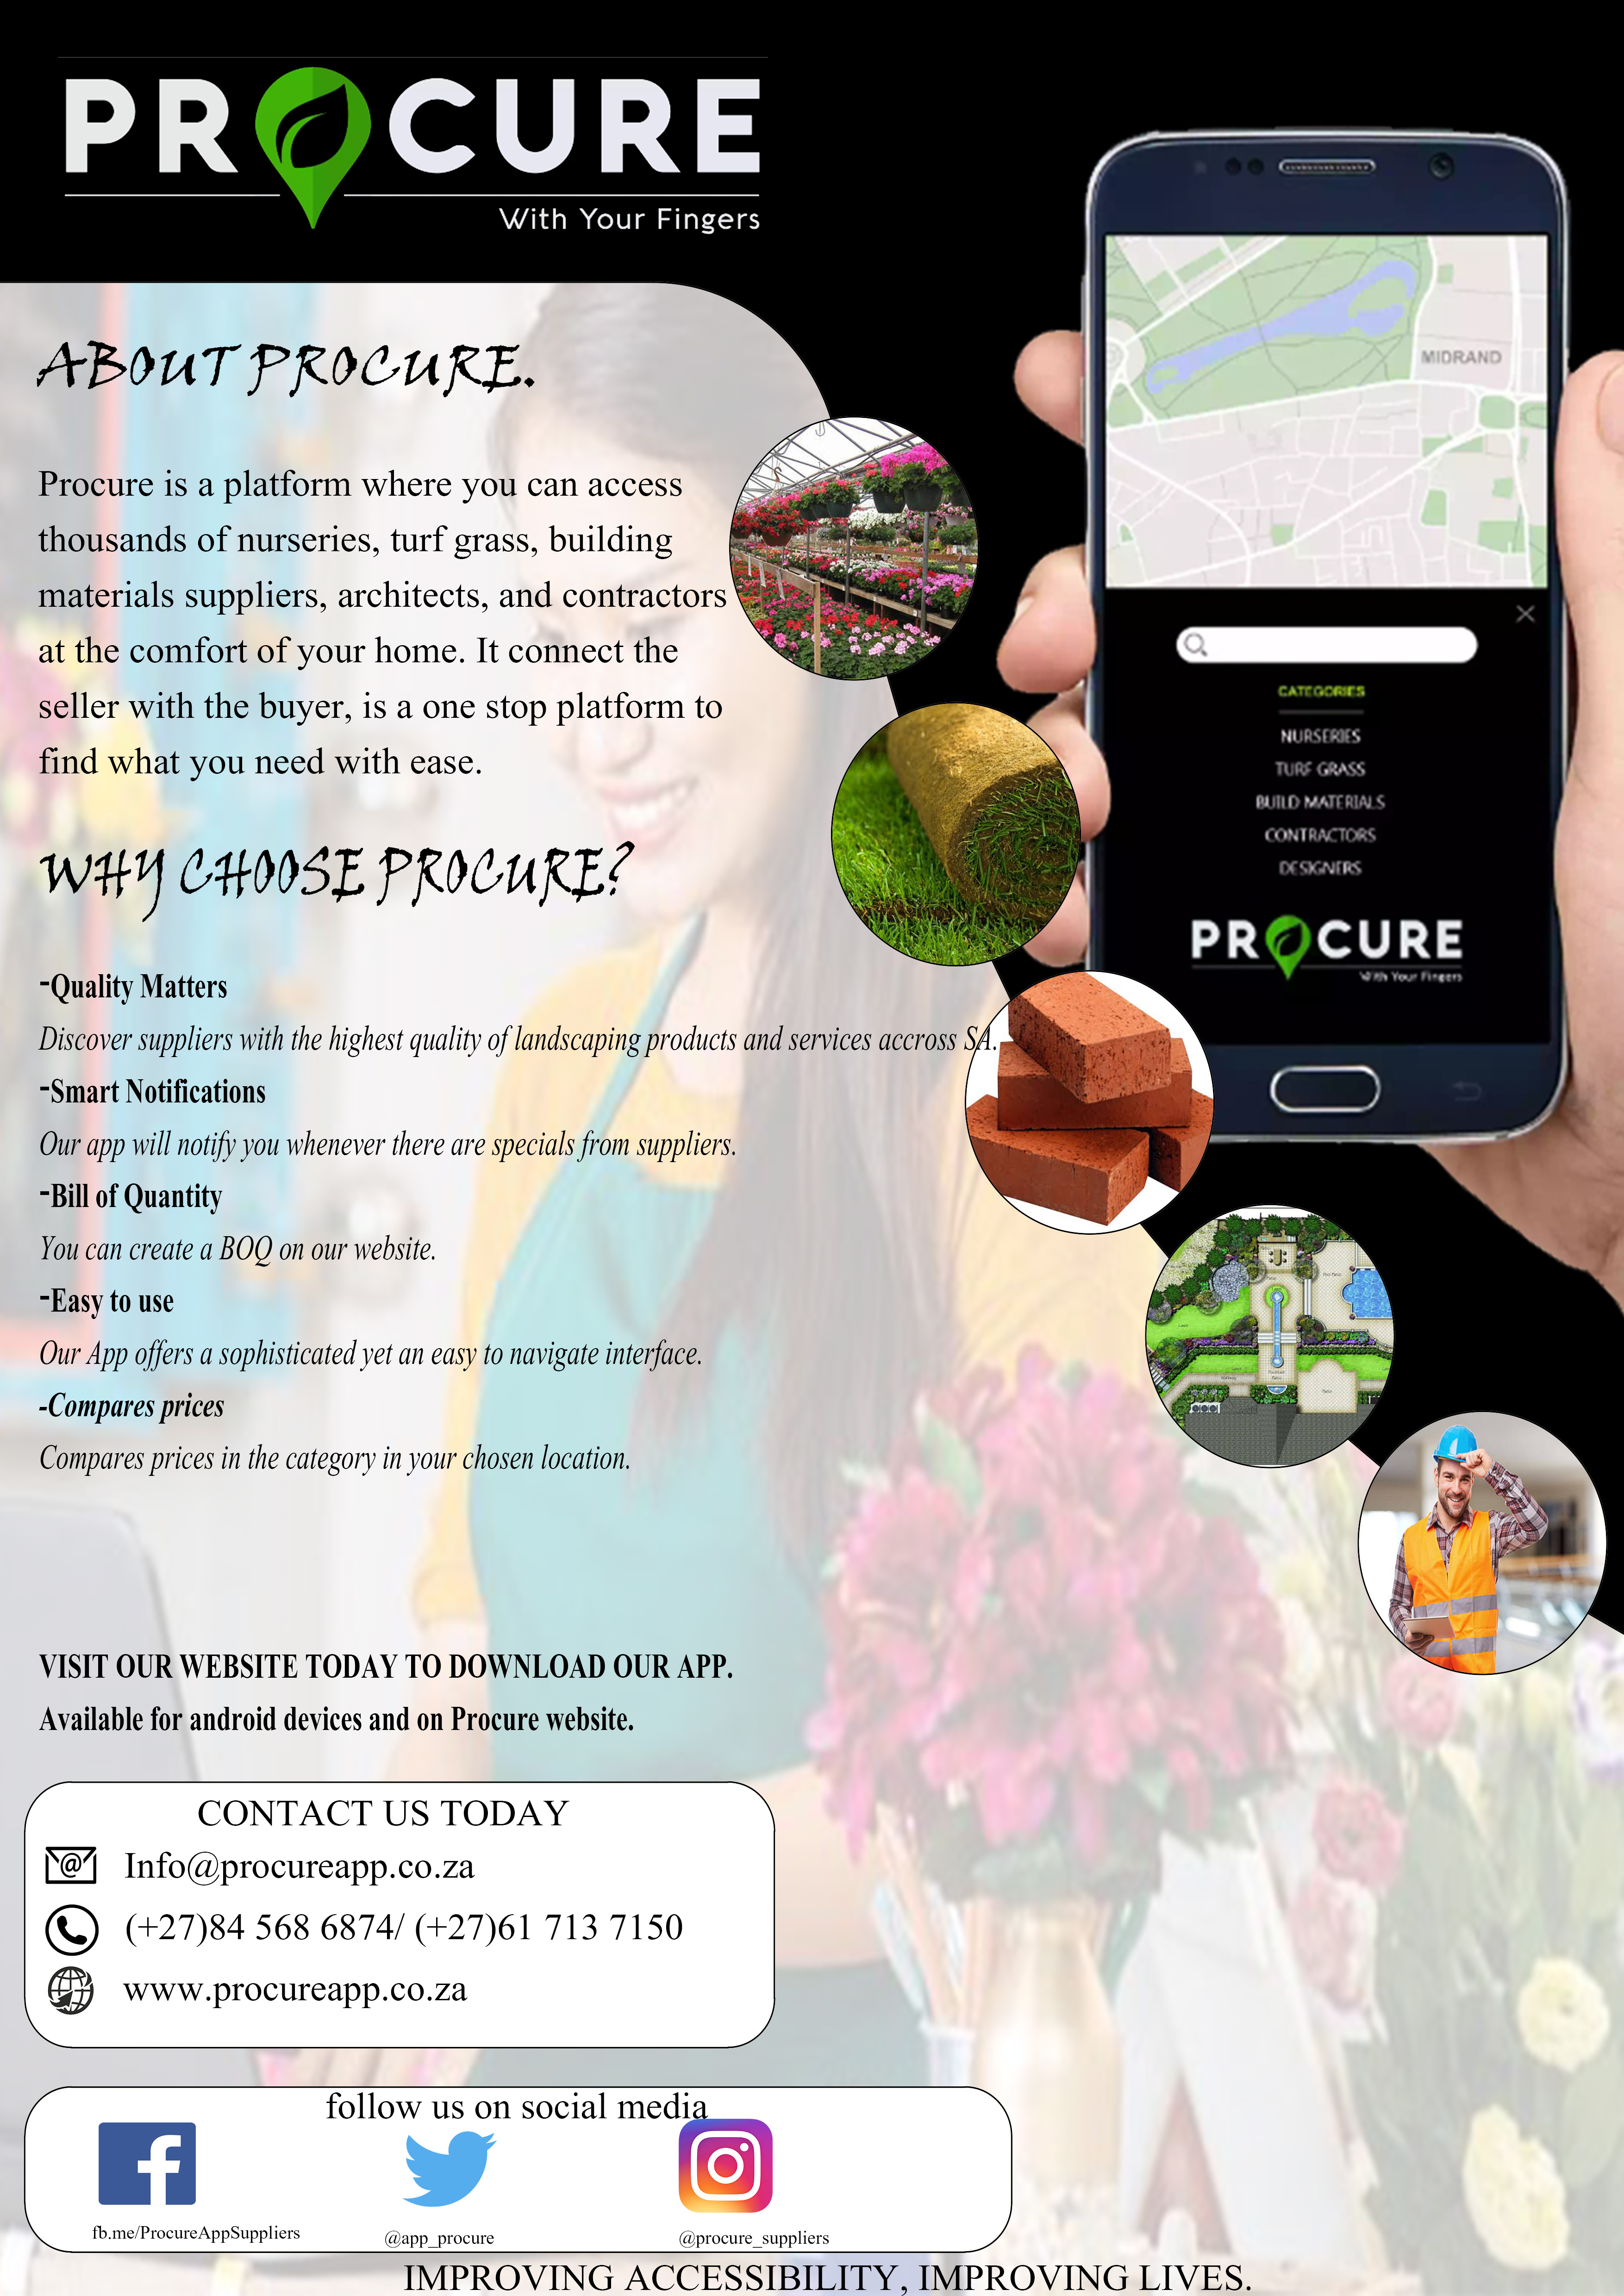 Procure app currently available in South Africa